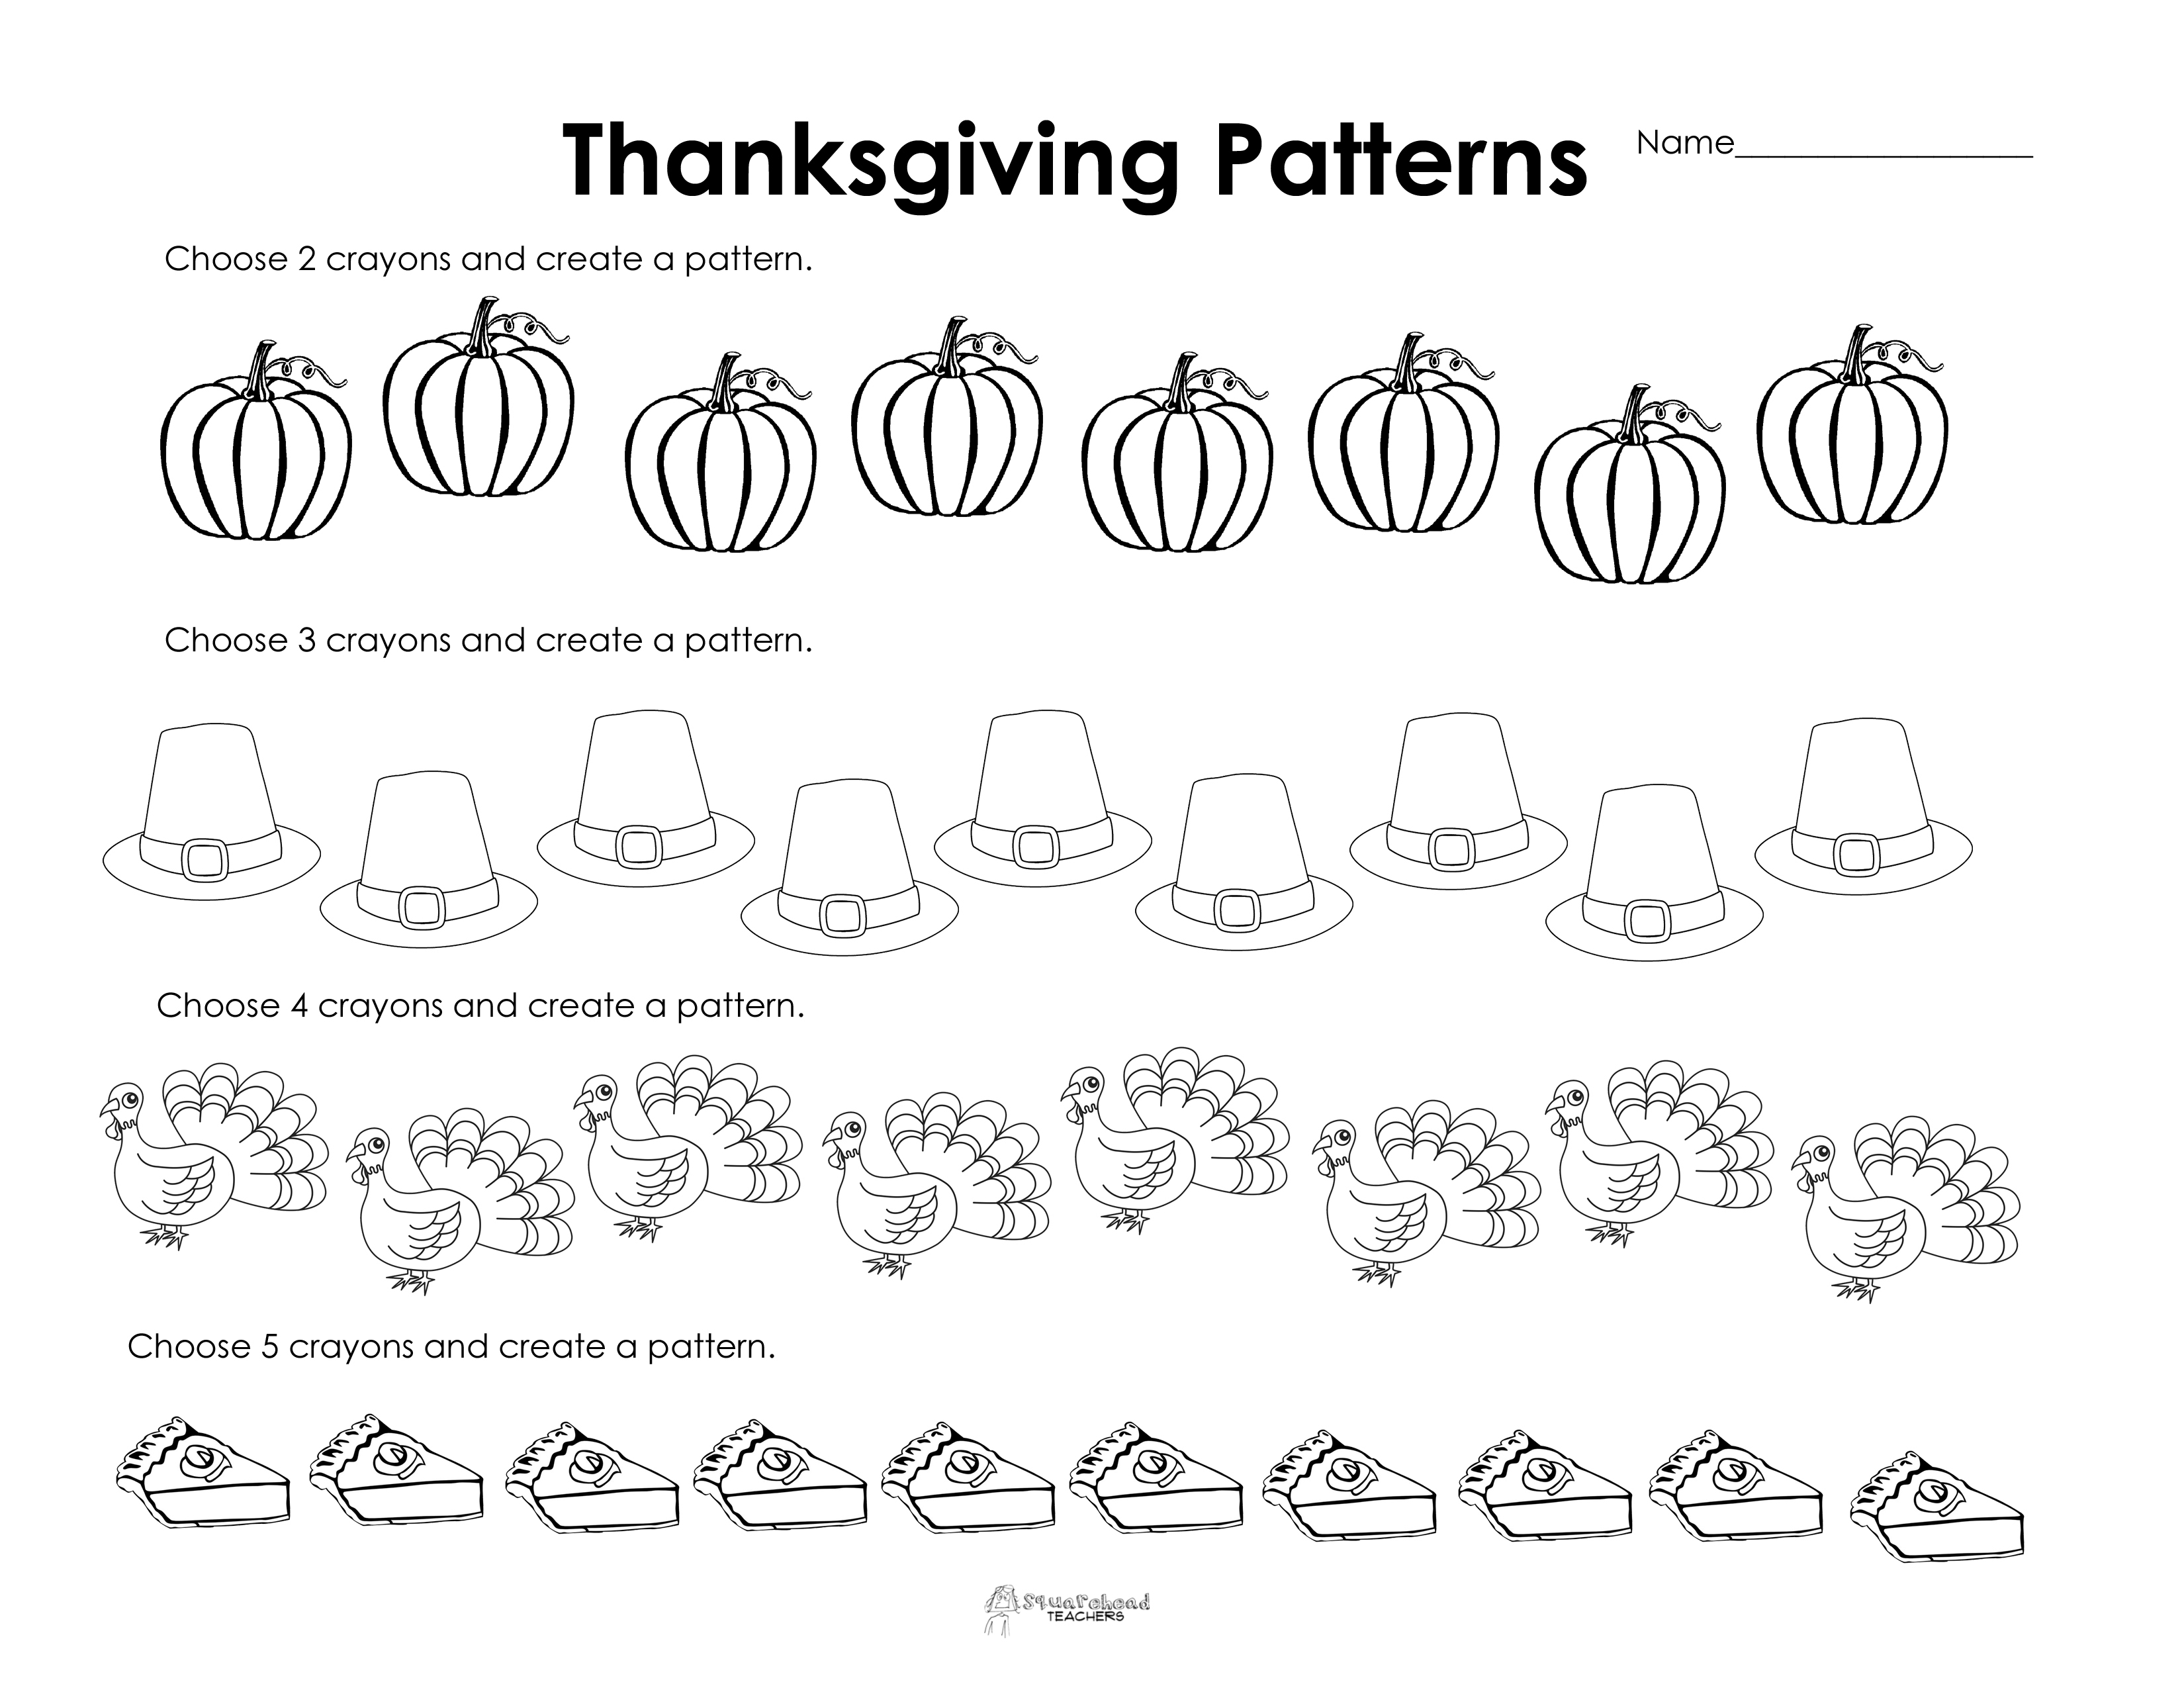 Free Printable Thanksgiving Worksheets For Preschoolers - 8.13 - Free Printable Thanksgiving Math Worksheets For 3Rd Grade